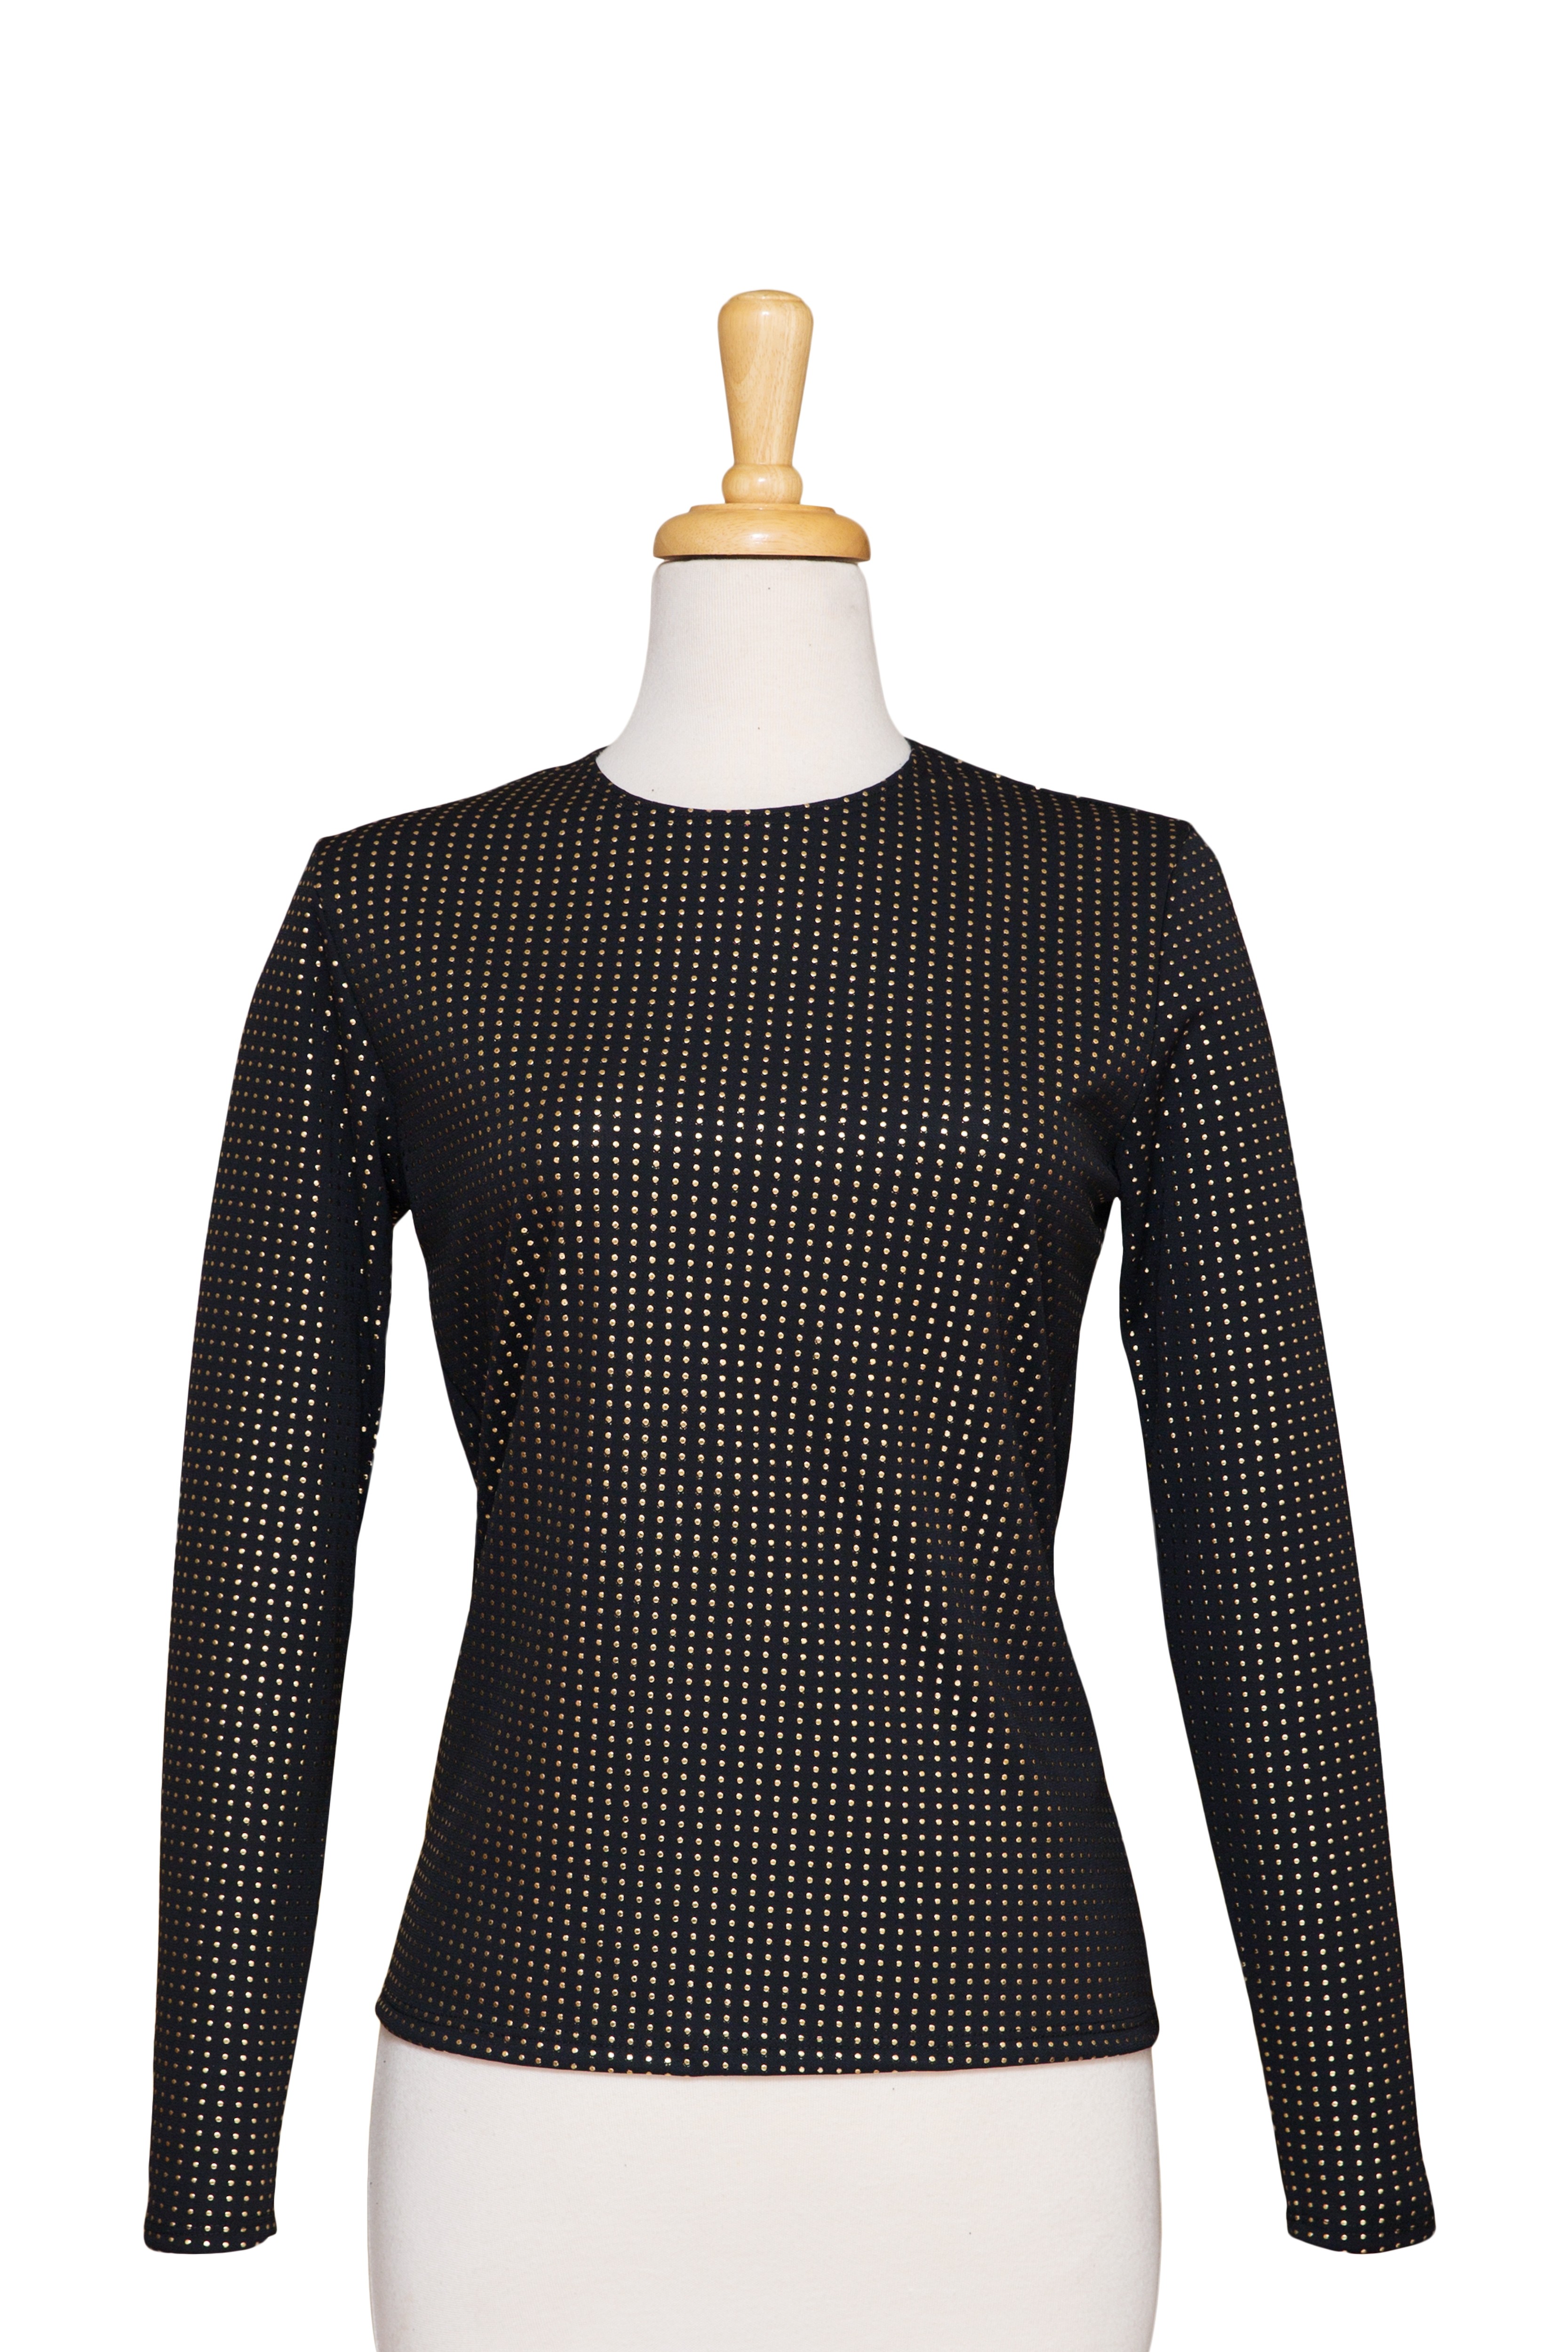 Long Sleeve Black with Gold Dots Microfiber Top